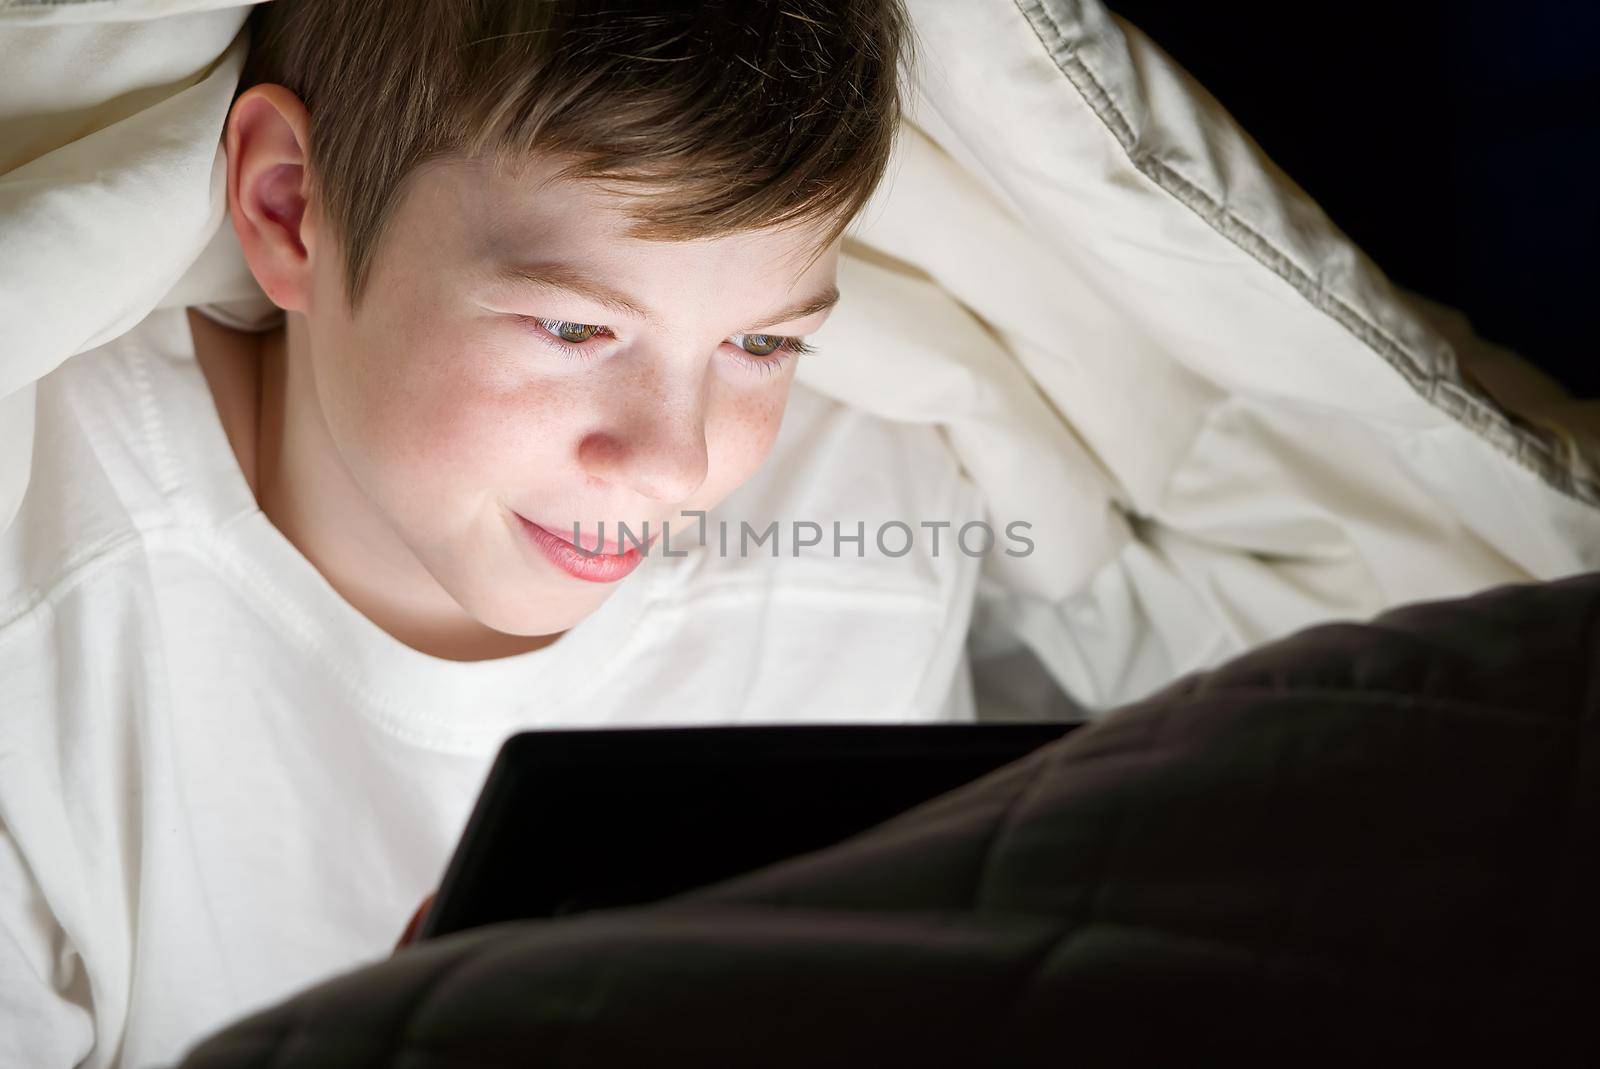 Distance learning. Online education. Happy boy in bed under blanket with tablet in dark. Child's face is illuminated by bright monitor. Quarantine. social media addiction by PhotoTime